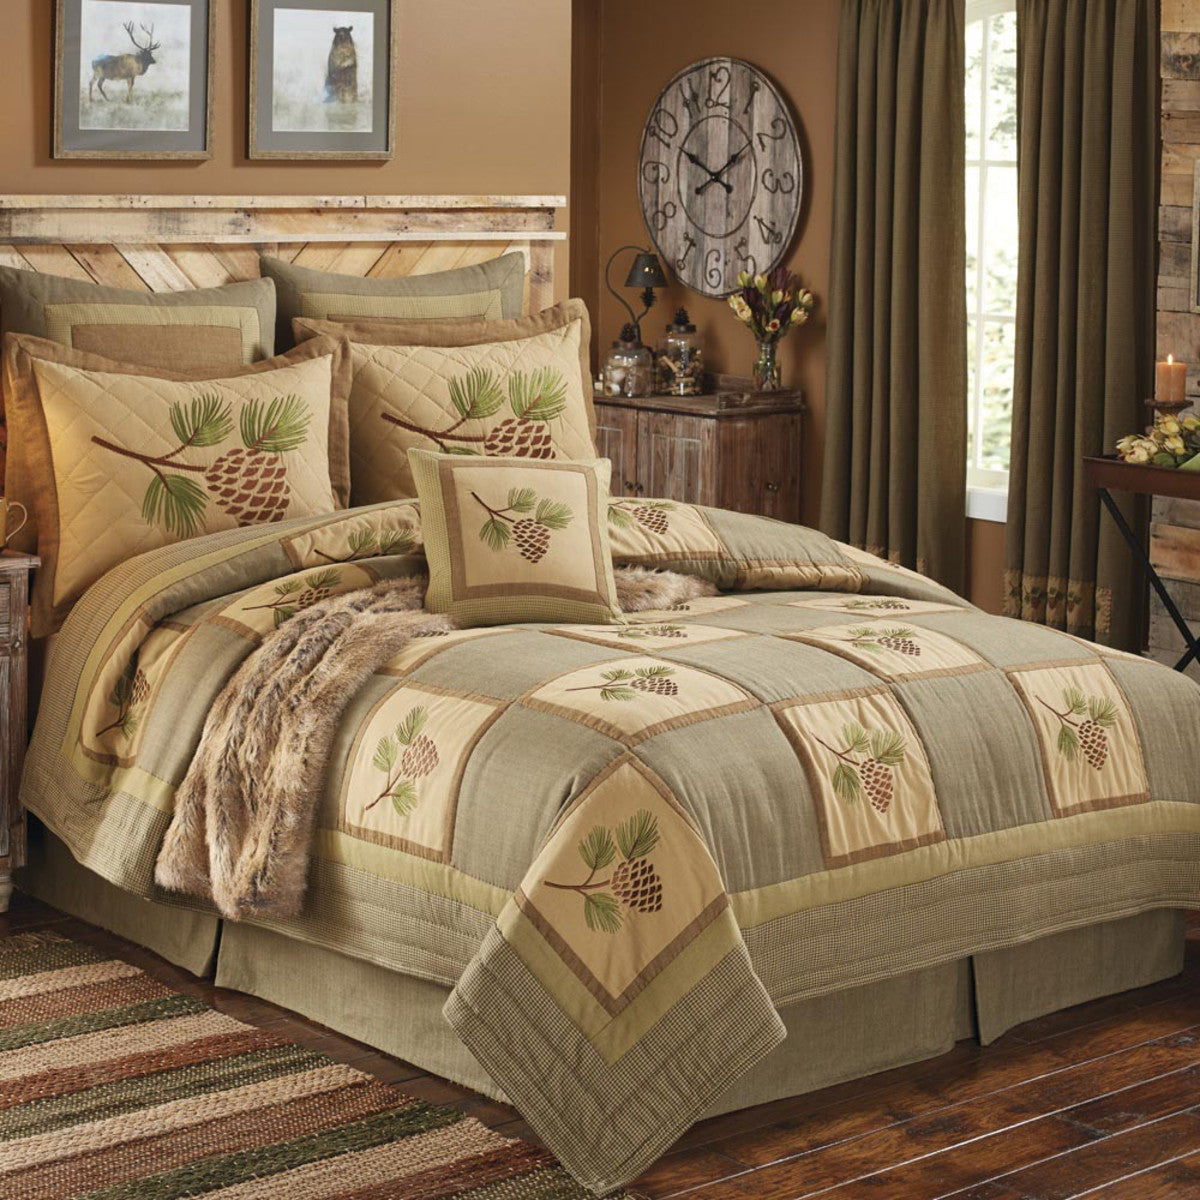 Pineview King Bed Skirt - Park Designs